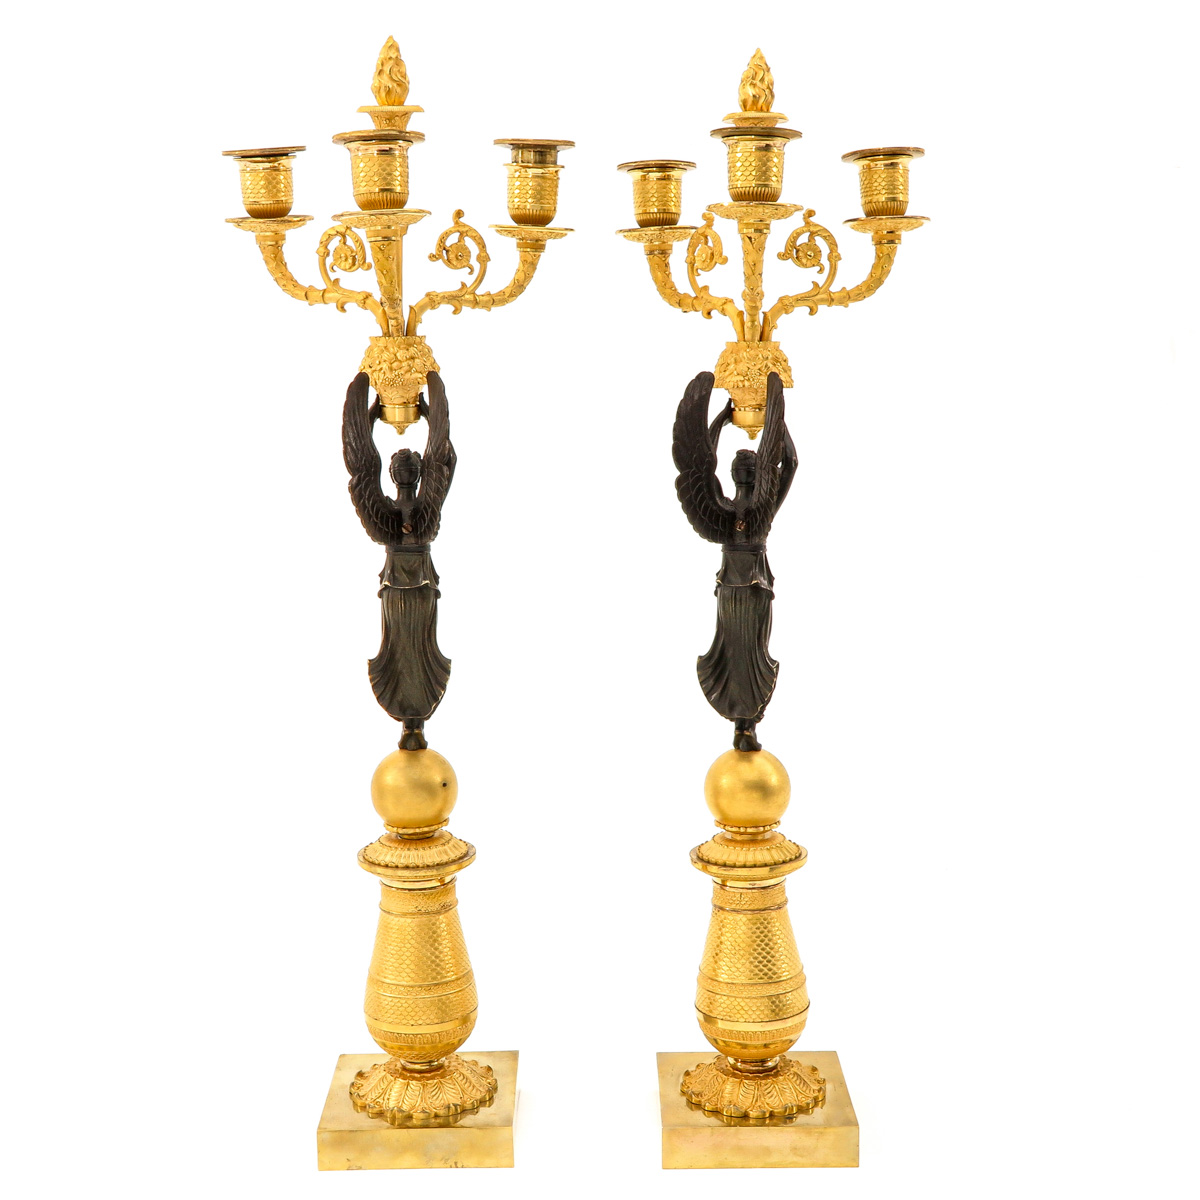 A Pair of Empire Period Candlesticks - Image 3 of 10